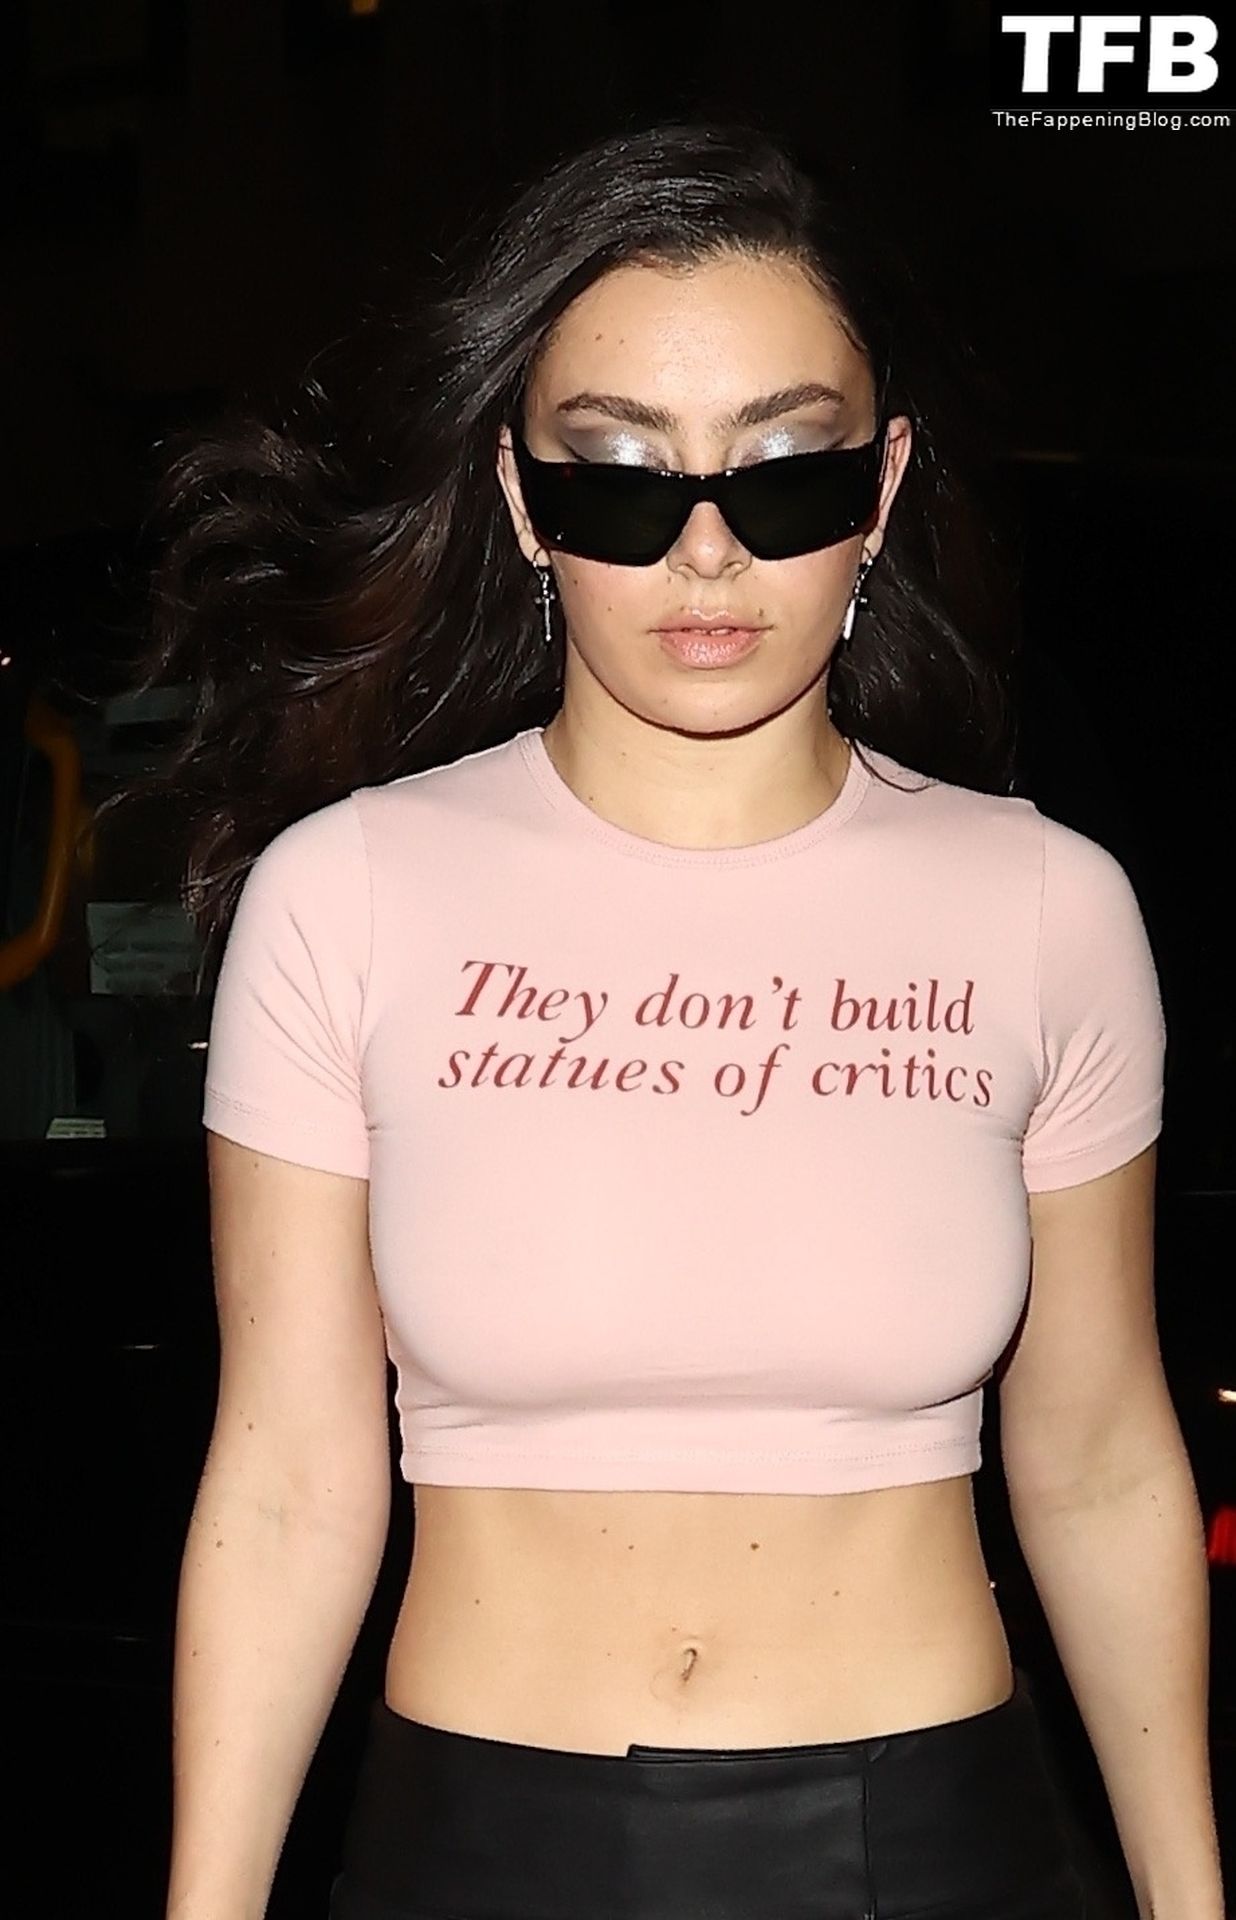 Charli-XCX-Sexy-The-Fappening-Blog-4-1.jpg